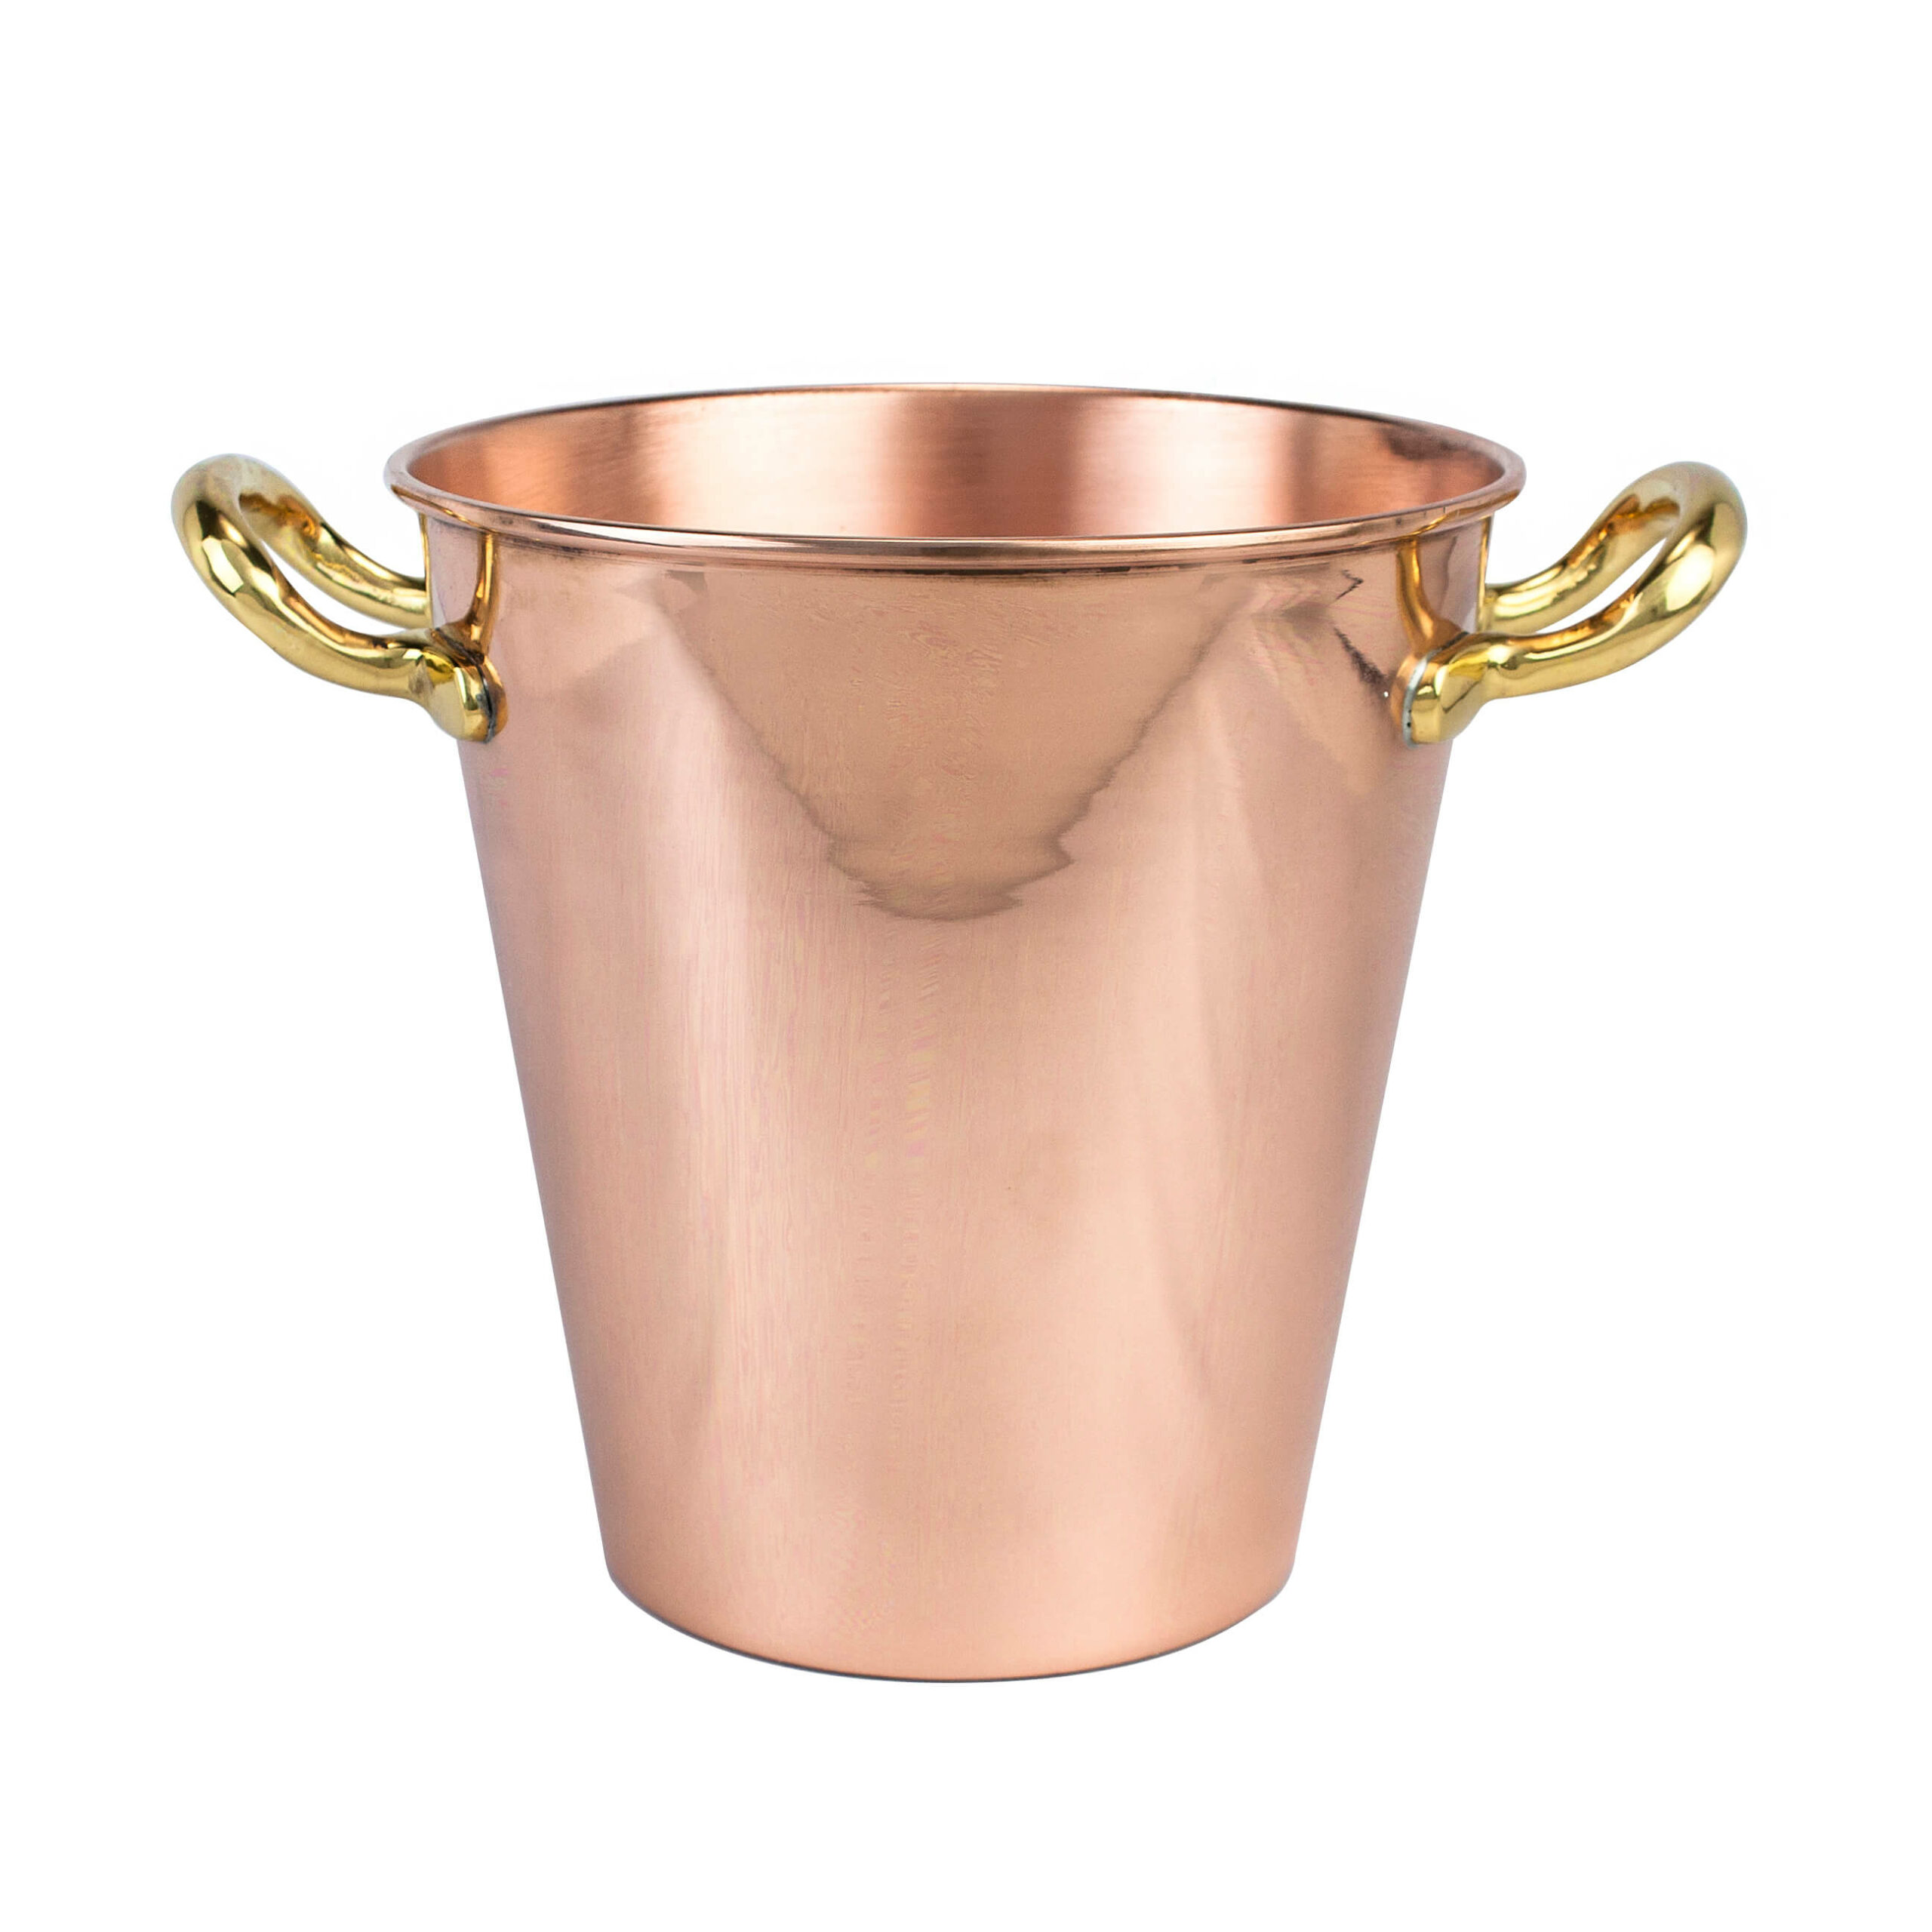 Bucket: 1 Gallon Smooth Finish Copper Bucket for Moscow Mule by Copper Mug  Co.